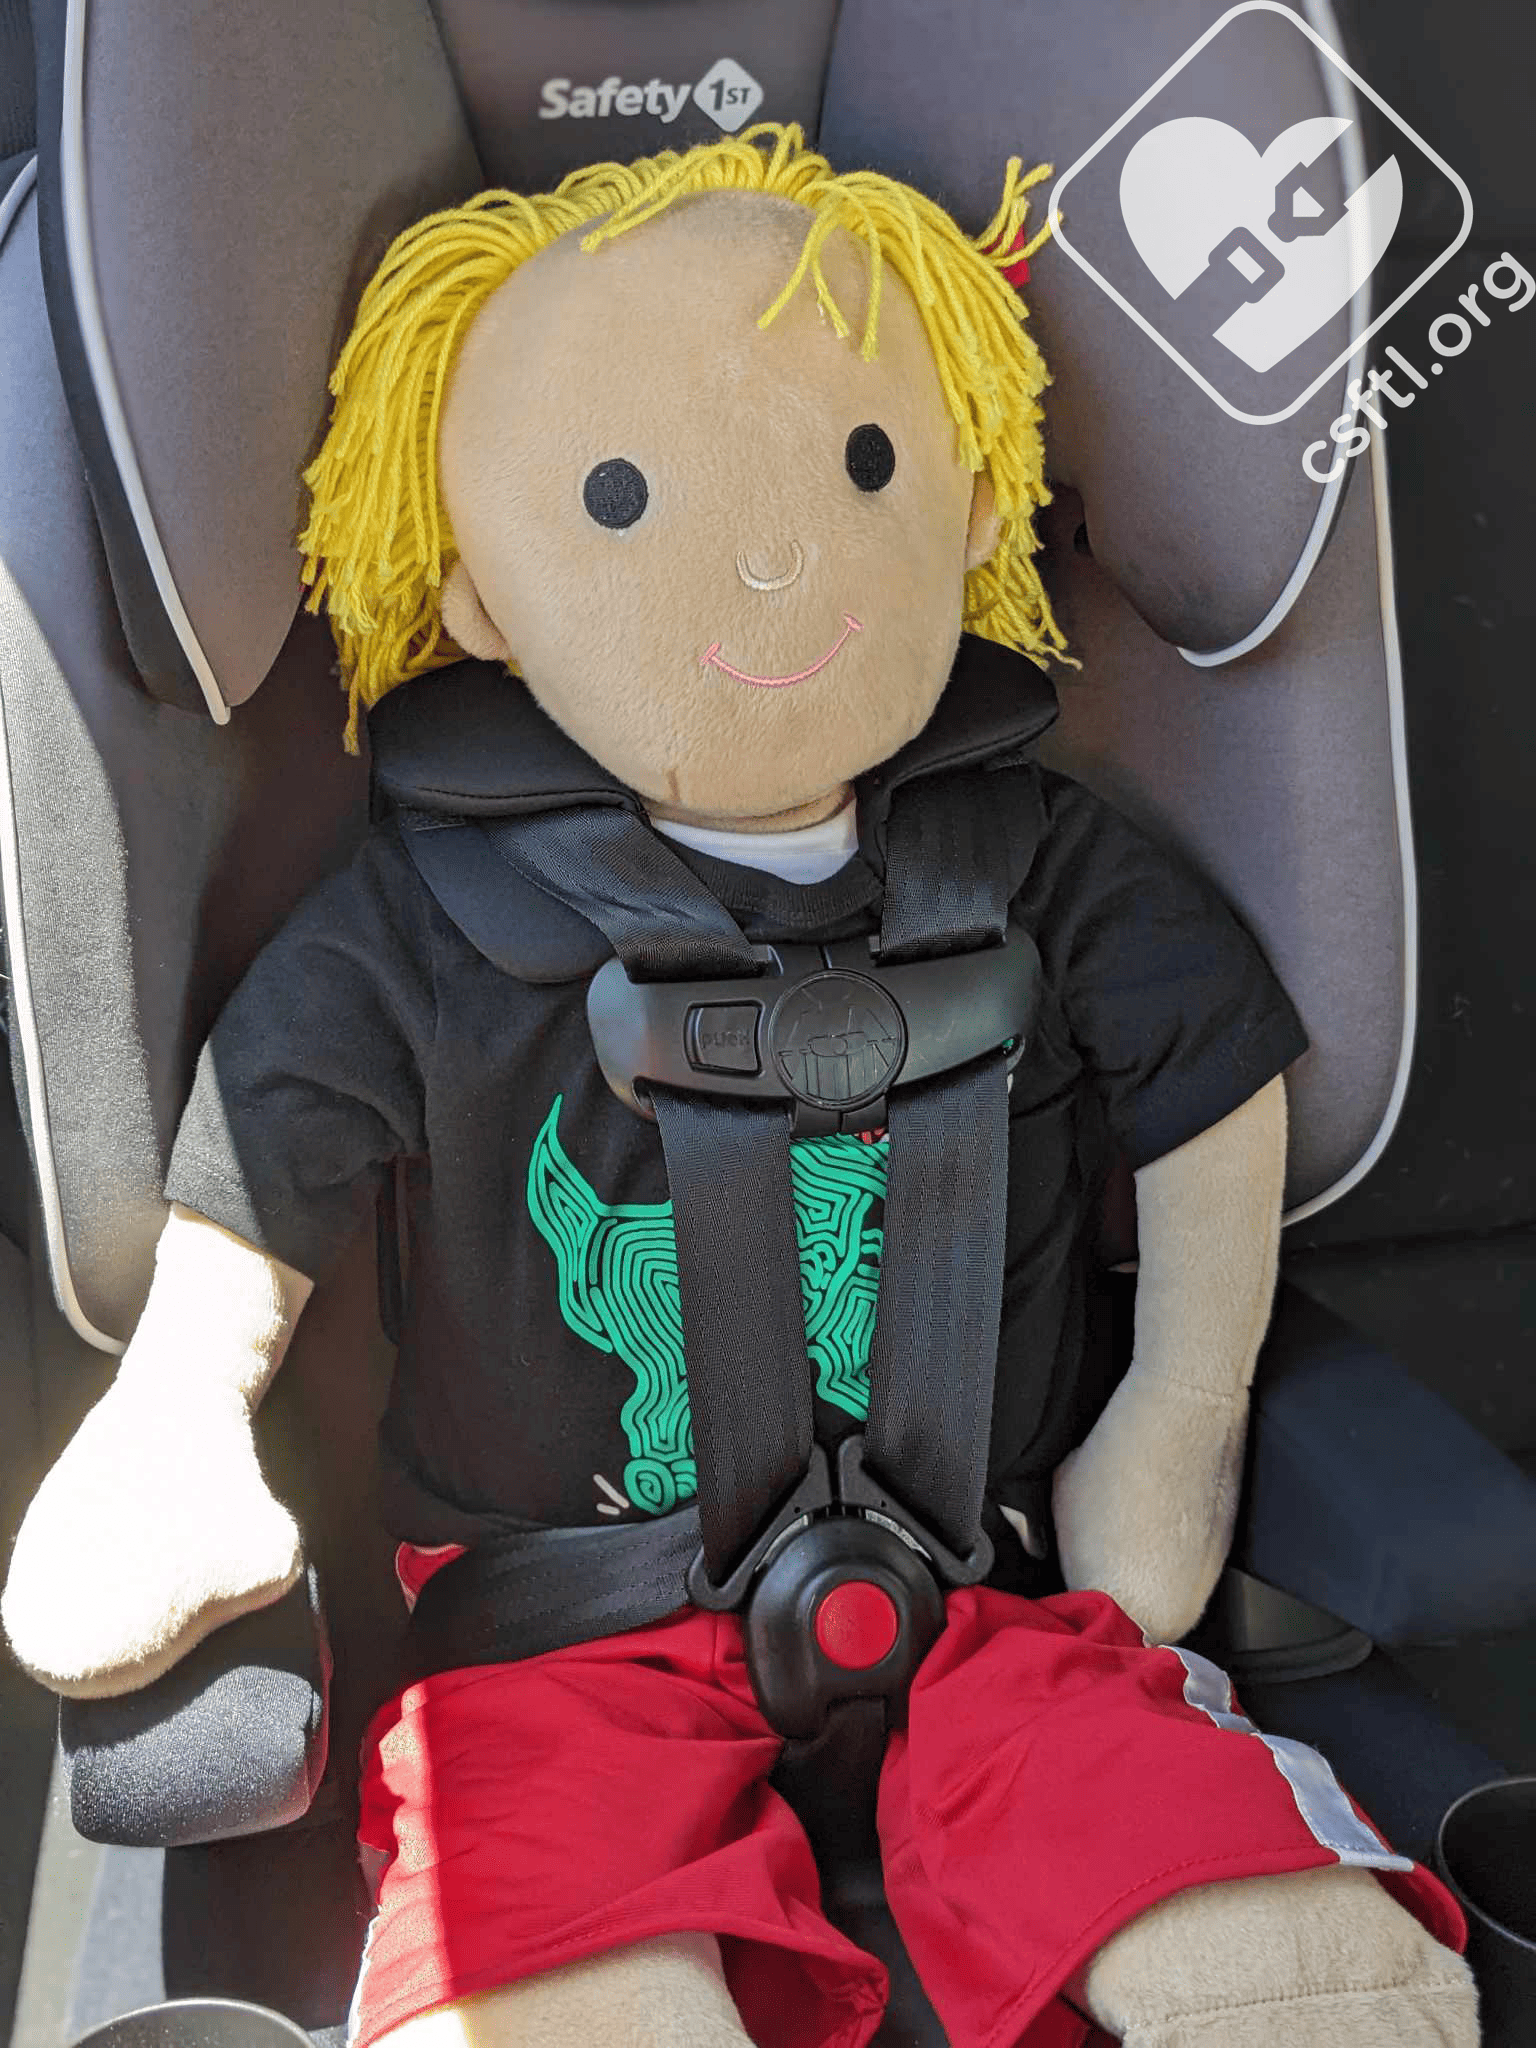 Guide to Car Seat Safety with School-Aged Kids -- CSFTL